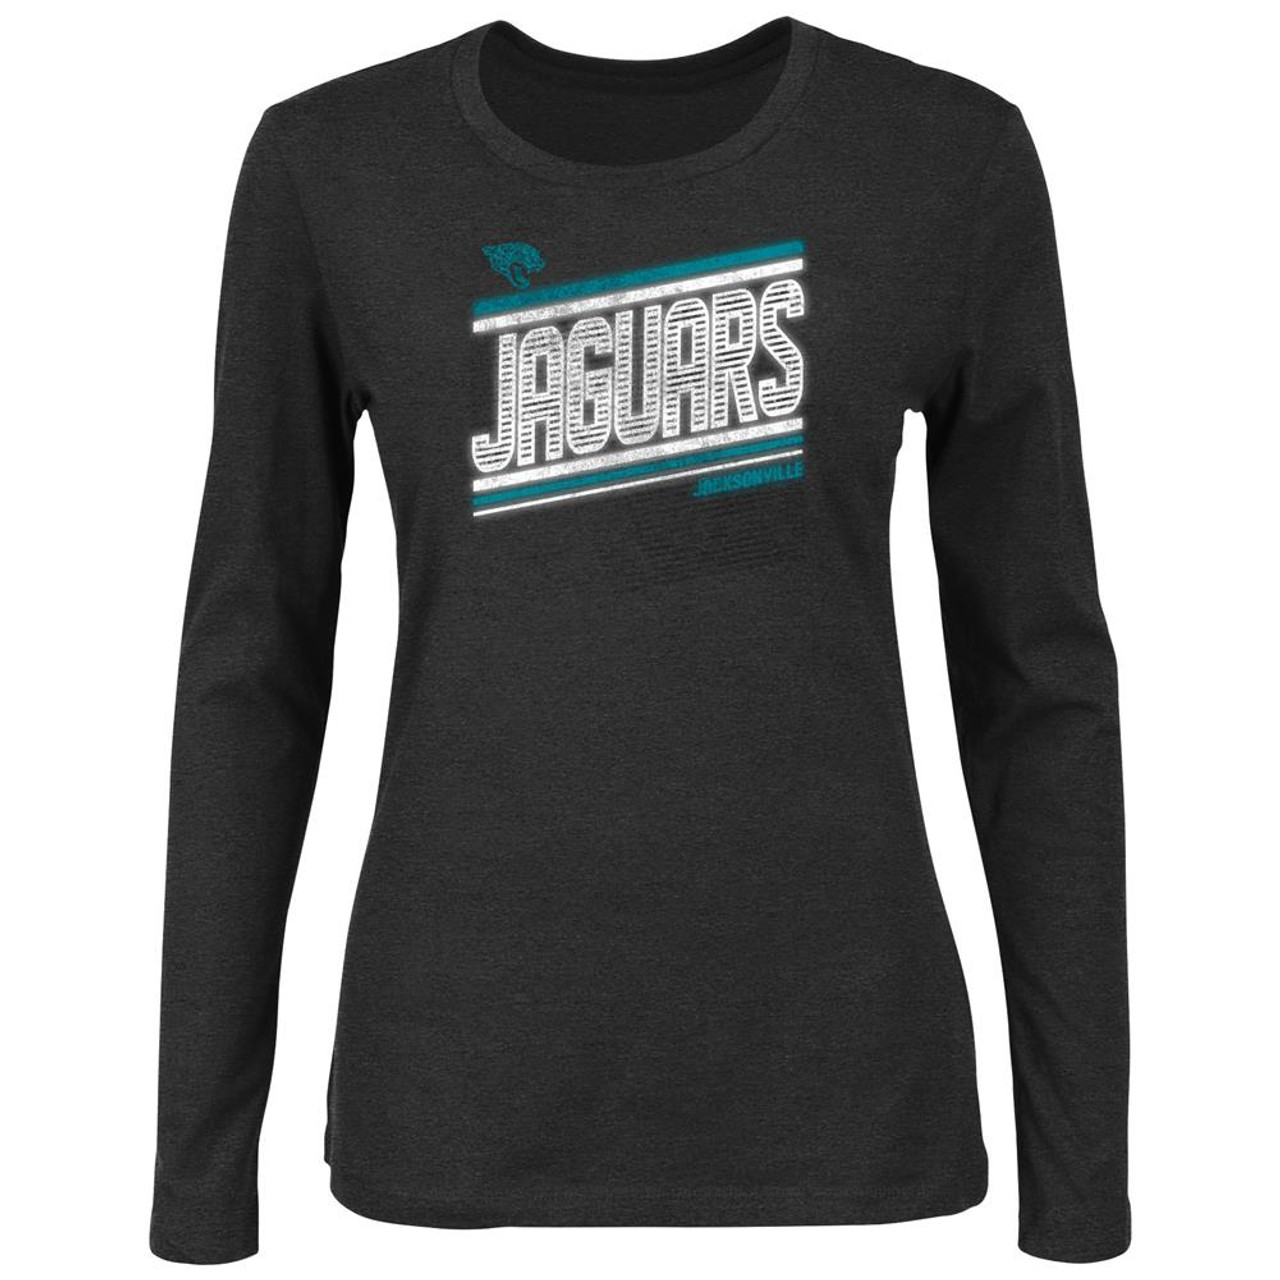 47 Brand / Women's Pittsburgh Pirates Gray Parkway Long Sleeve T